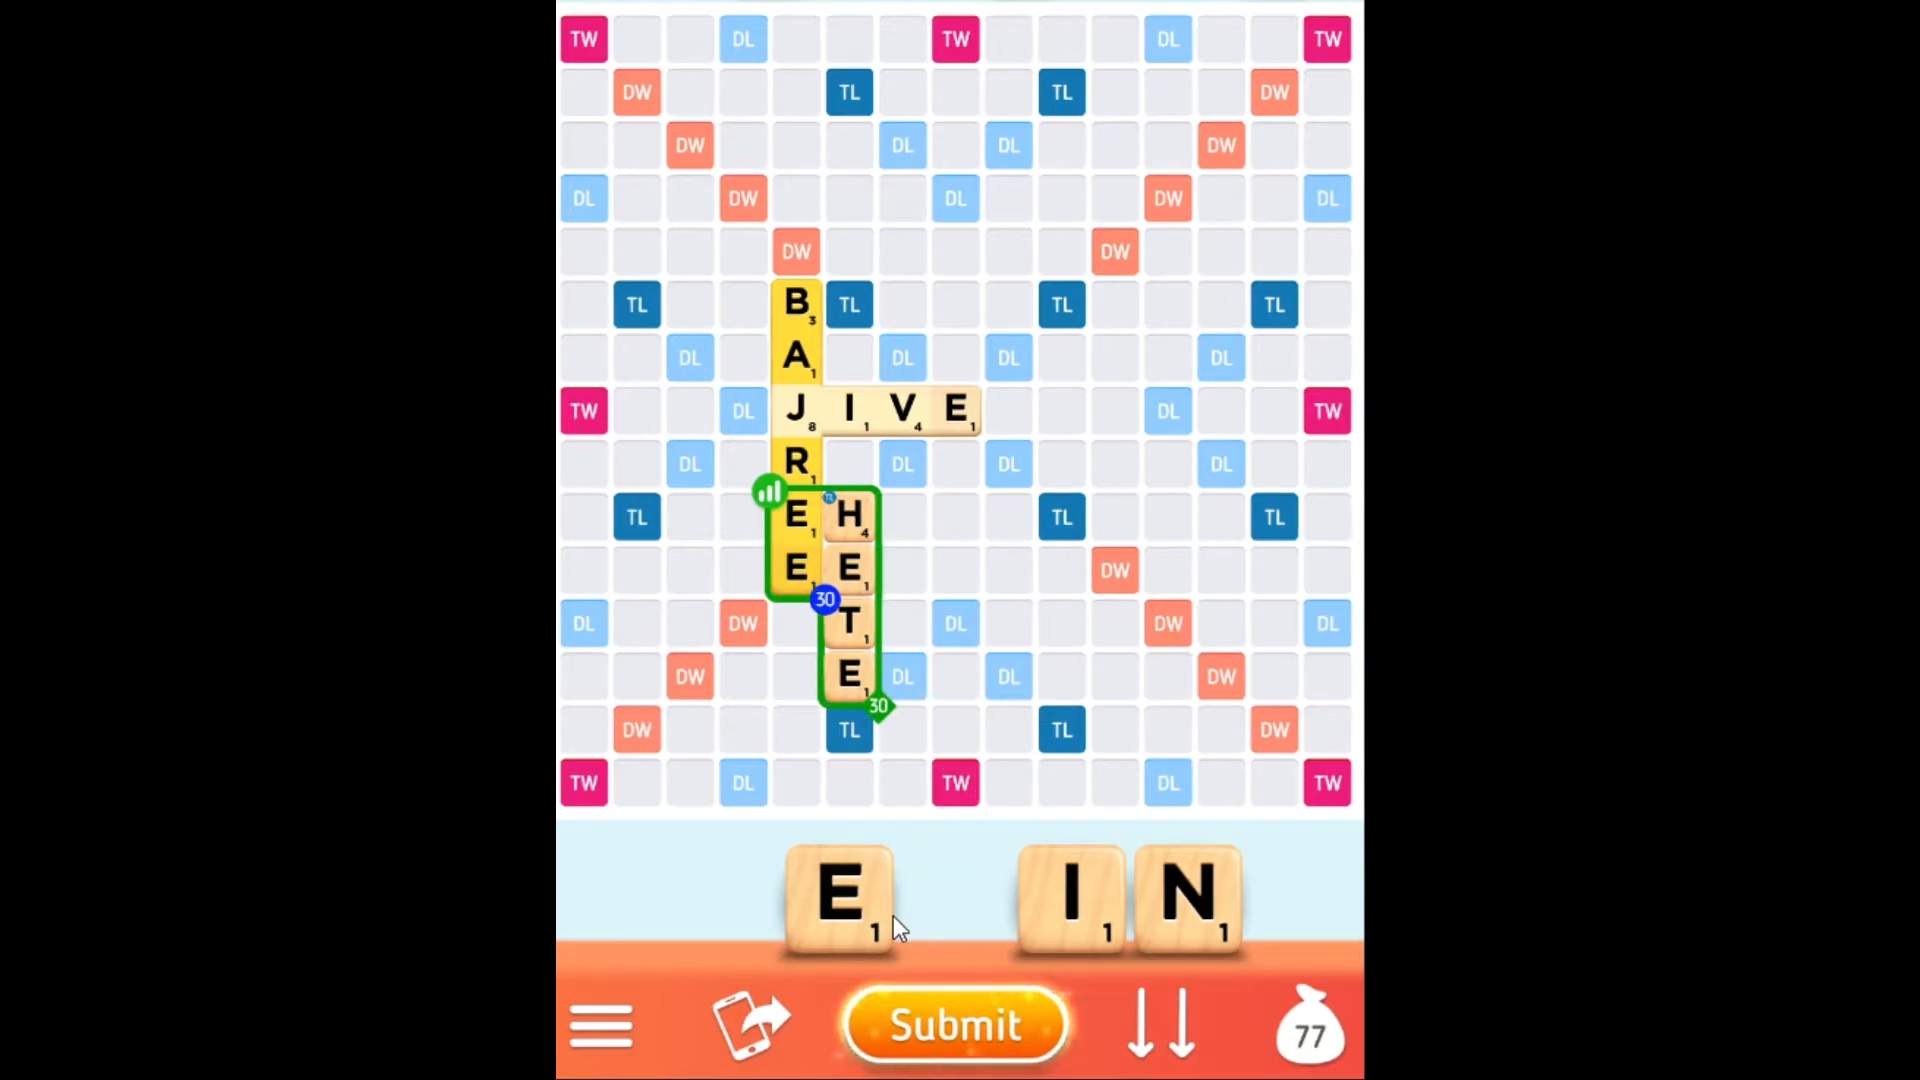 Best word games -Scrabble. A screenshot shows a scrabble board with several tiles places on it.